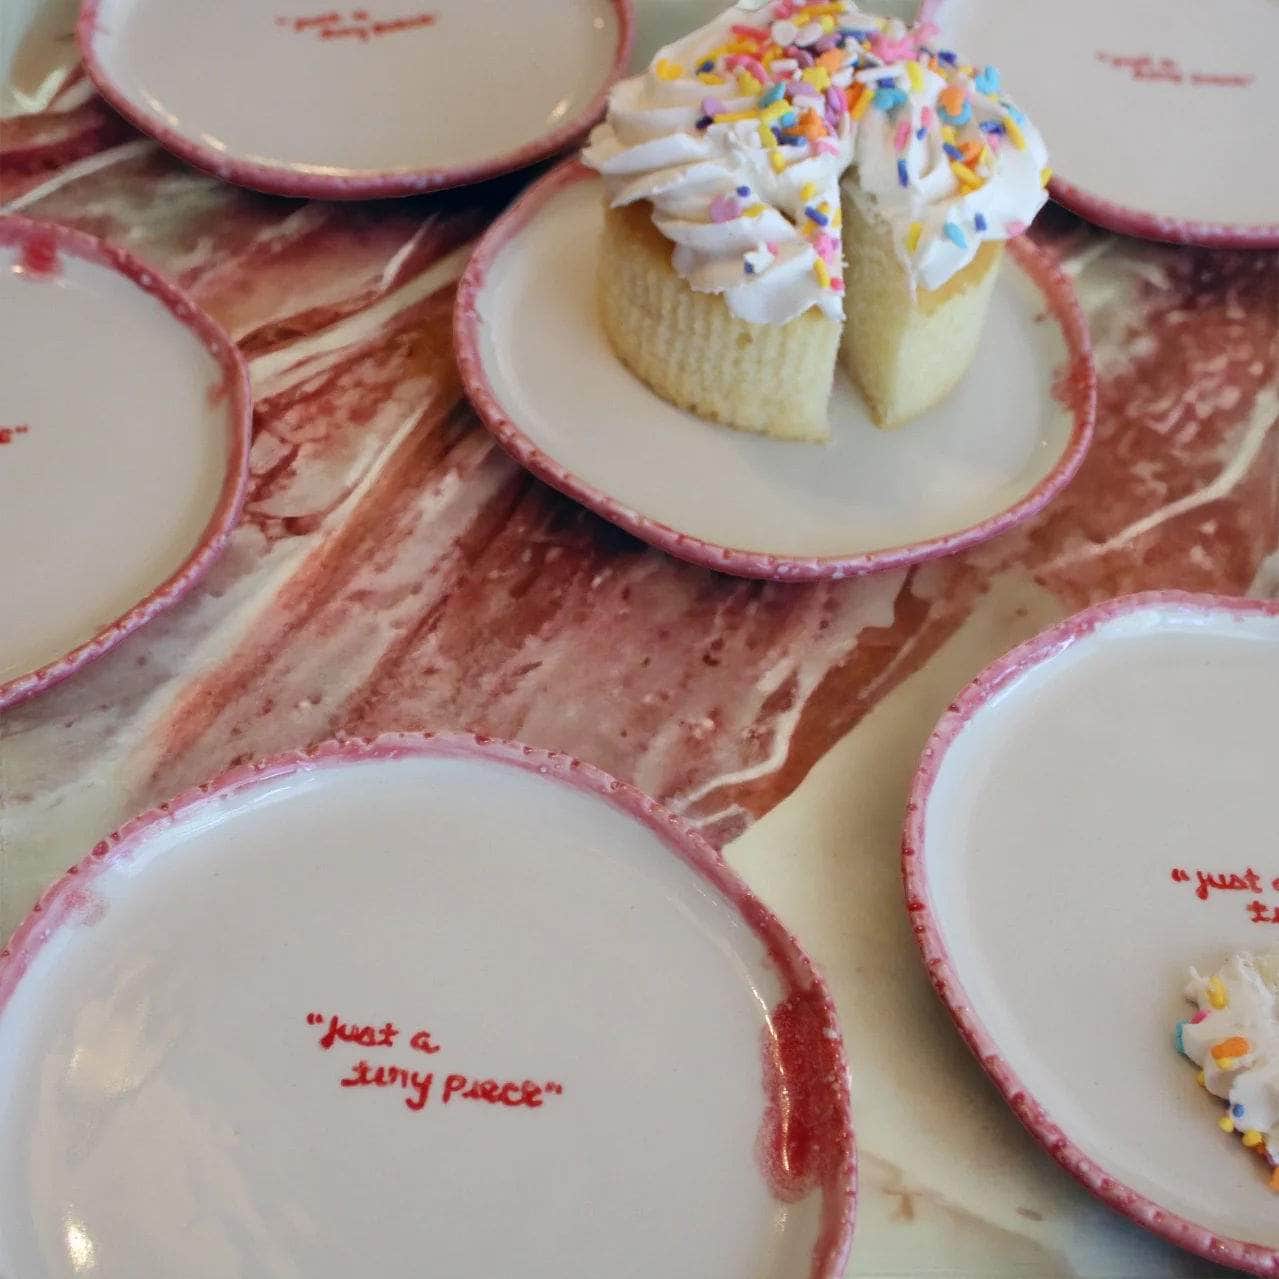 The Tiny Collection Dessert Plates | Set of Four